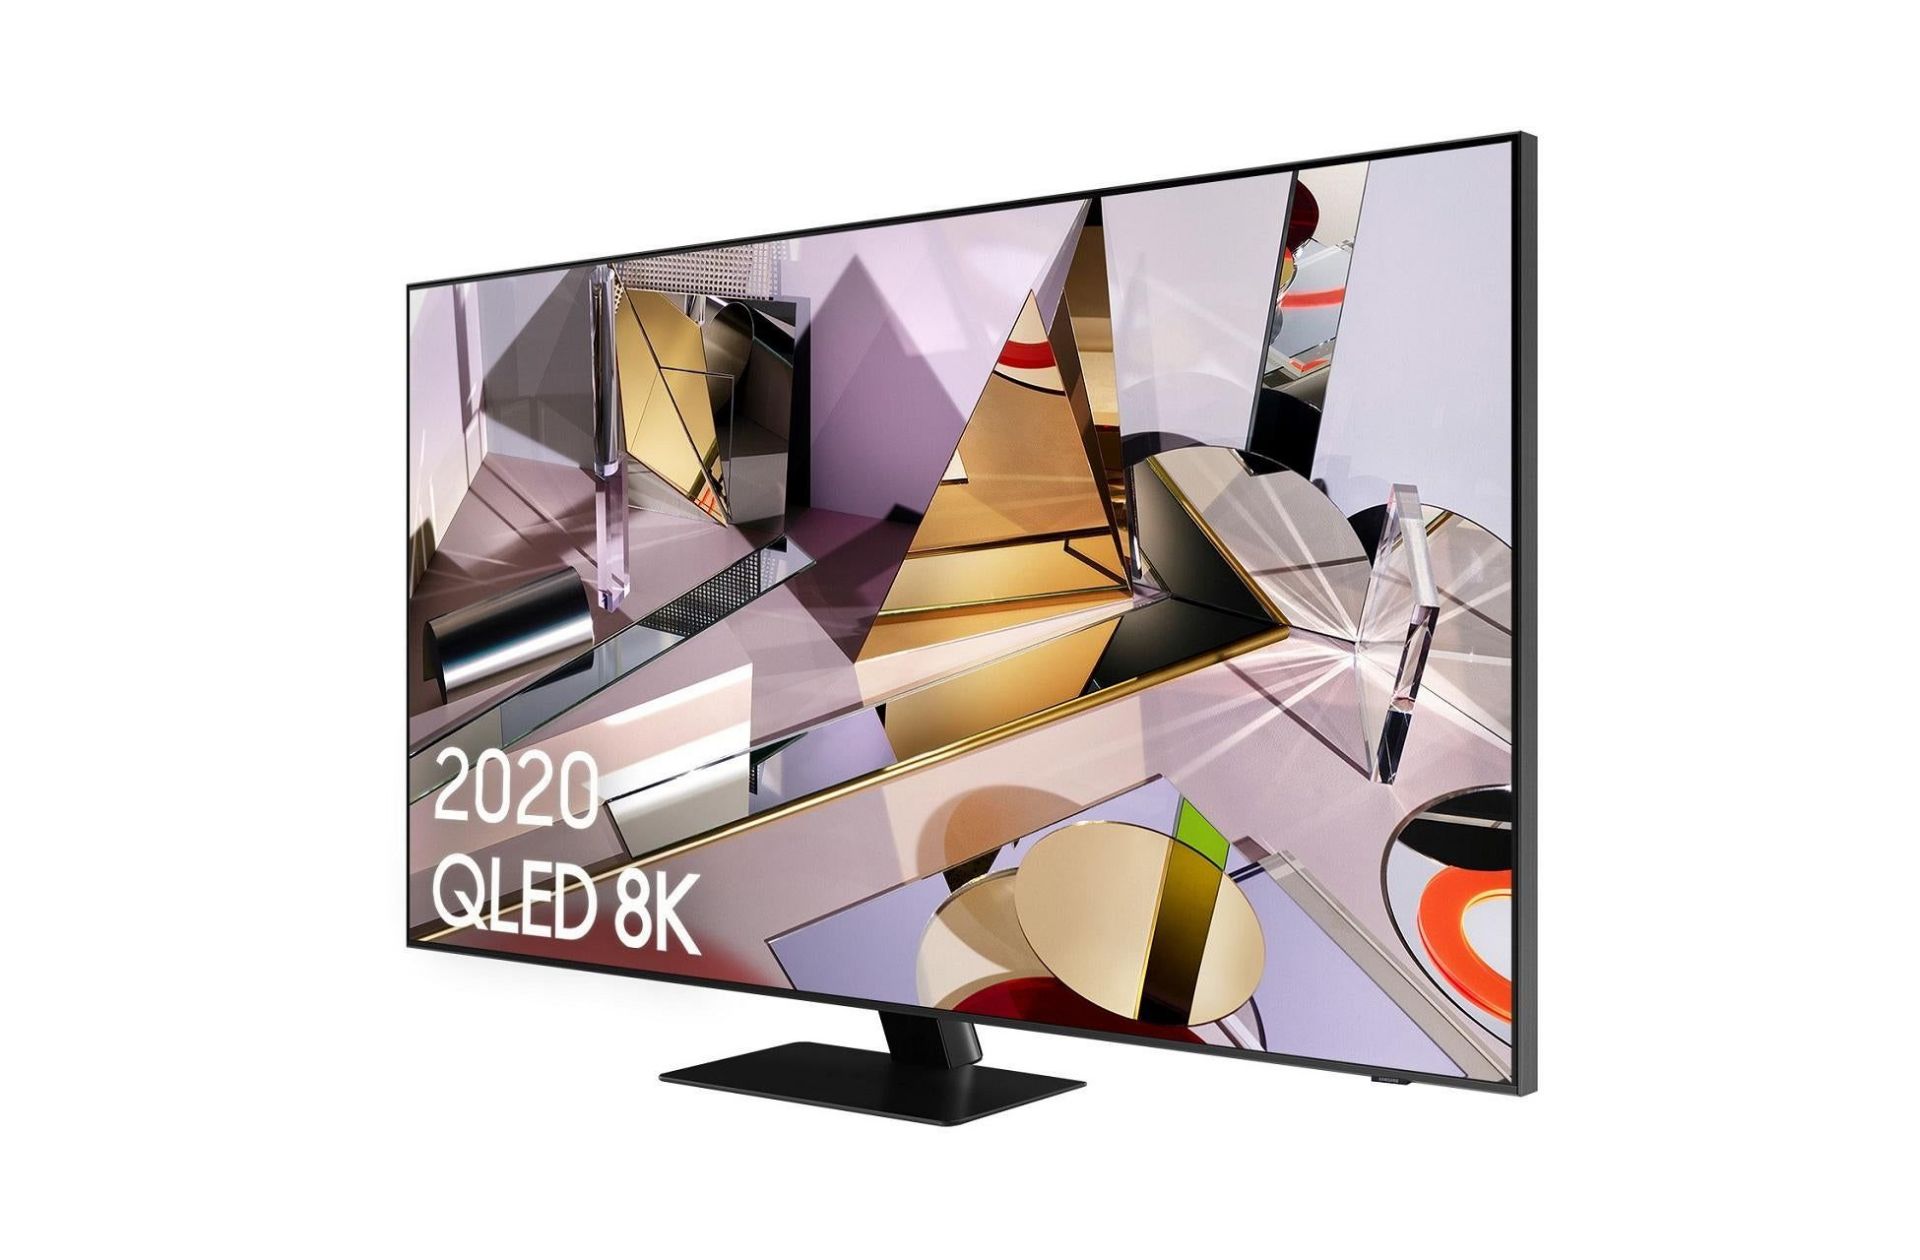 QE55Q700T 2020 55 INCH Q700T QLED 8K HDR 1000 SMART TV IN BLACK - £2,499 ON VERY.COM - LOW RESERVE! - Image 2 of 4